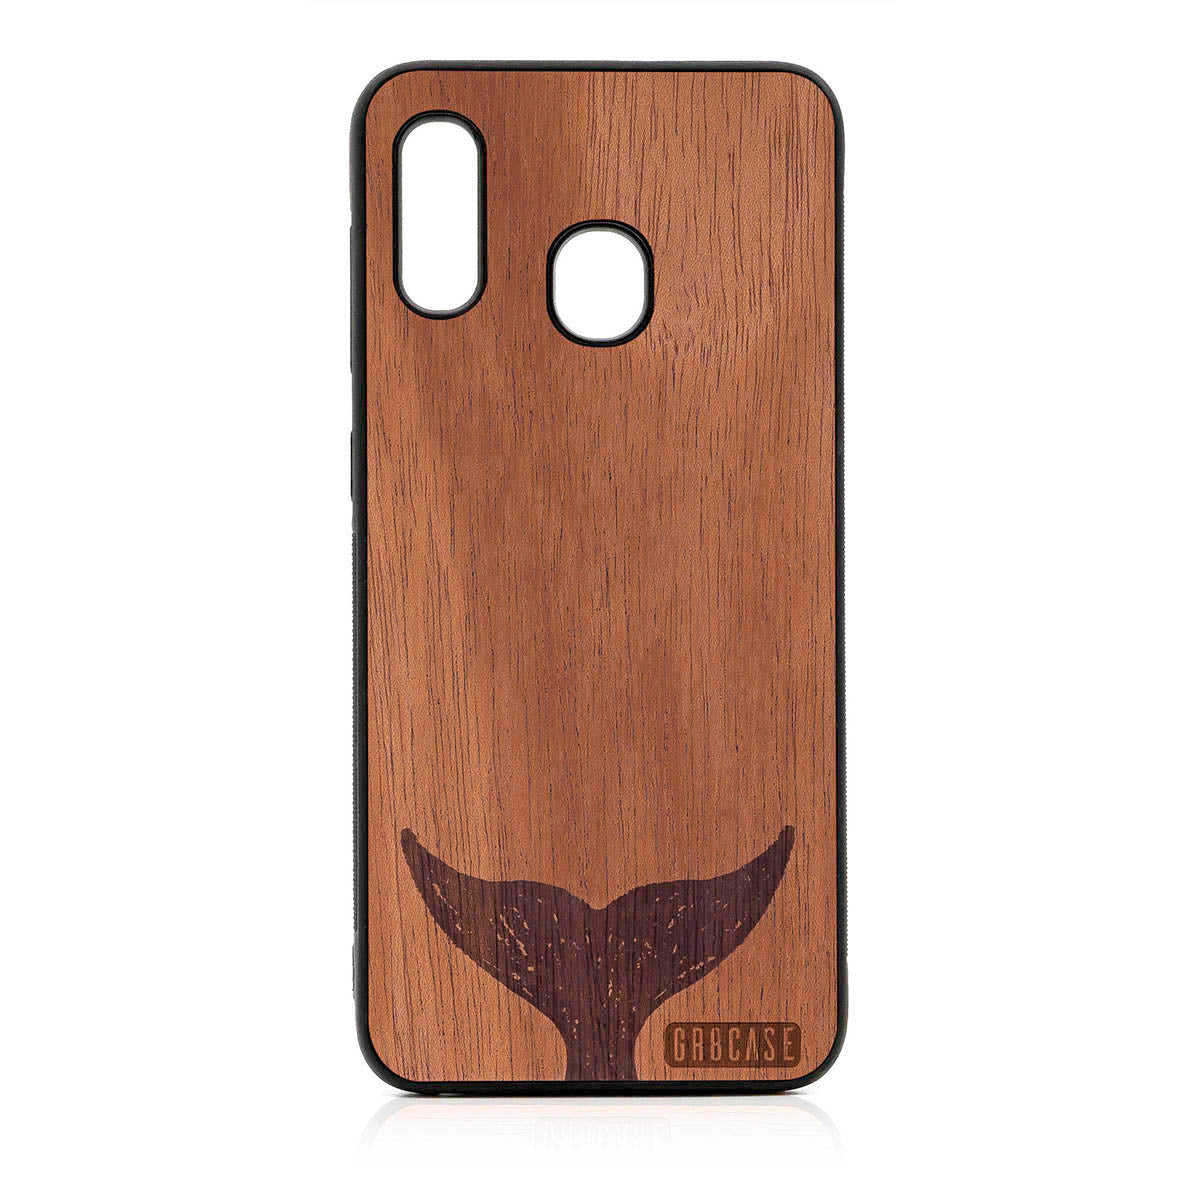 Whale Tail Design Wood Case For Samsung Galaxy A20